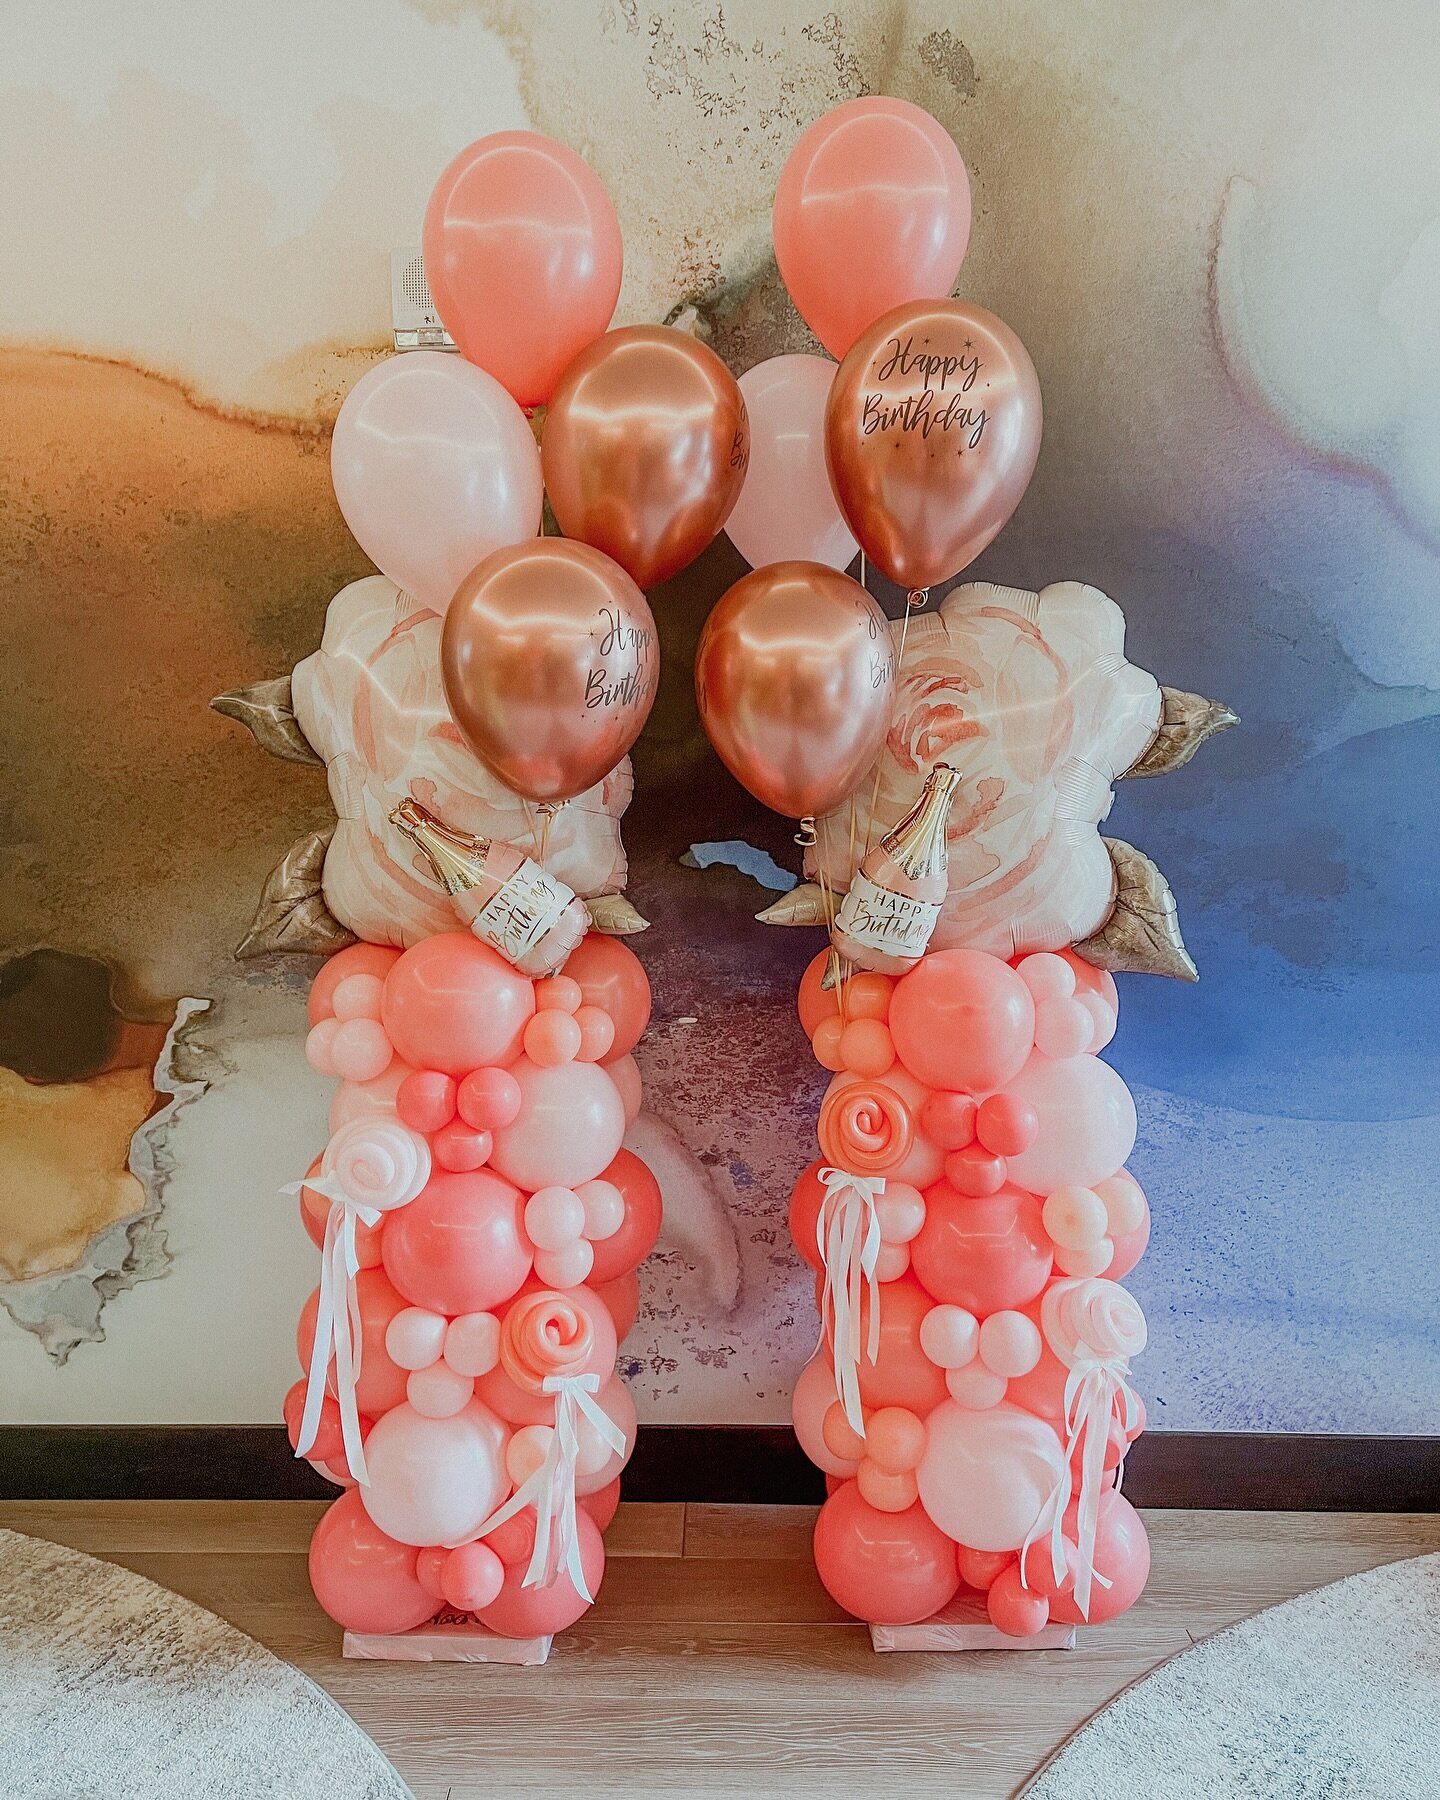 Pink and poetic mini columns! 
.

.
.
. #balloontower #balloon #birthdayballoons #birthday🎂 #balloons #organic balloons #balloonprofessional #balloonmosaic ballooncolumn #balloonarrangement #balloonmarquee #obsessed #🎈 #vail #balloonstylist #organi